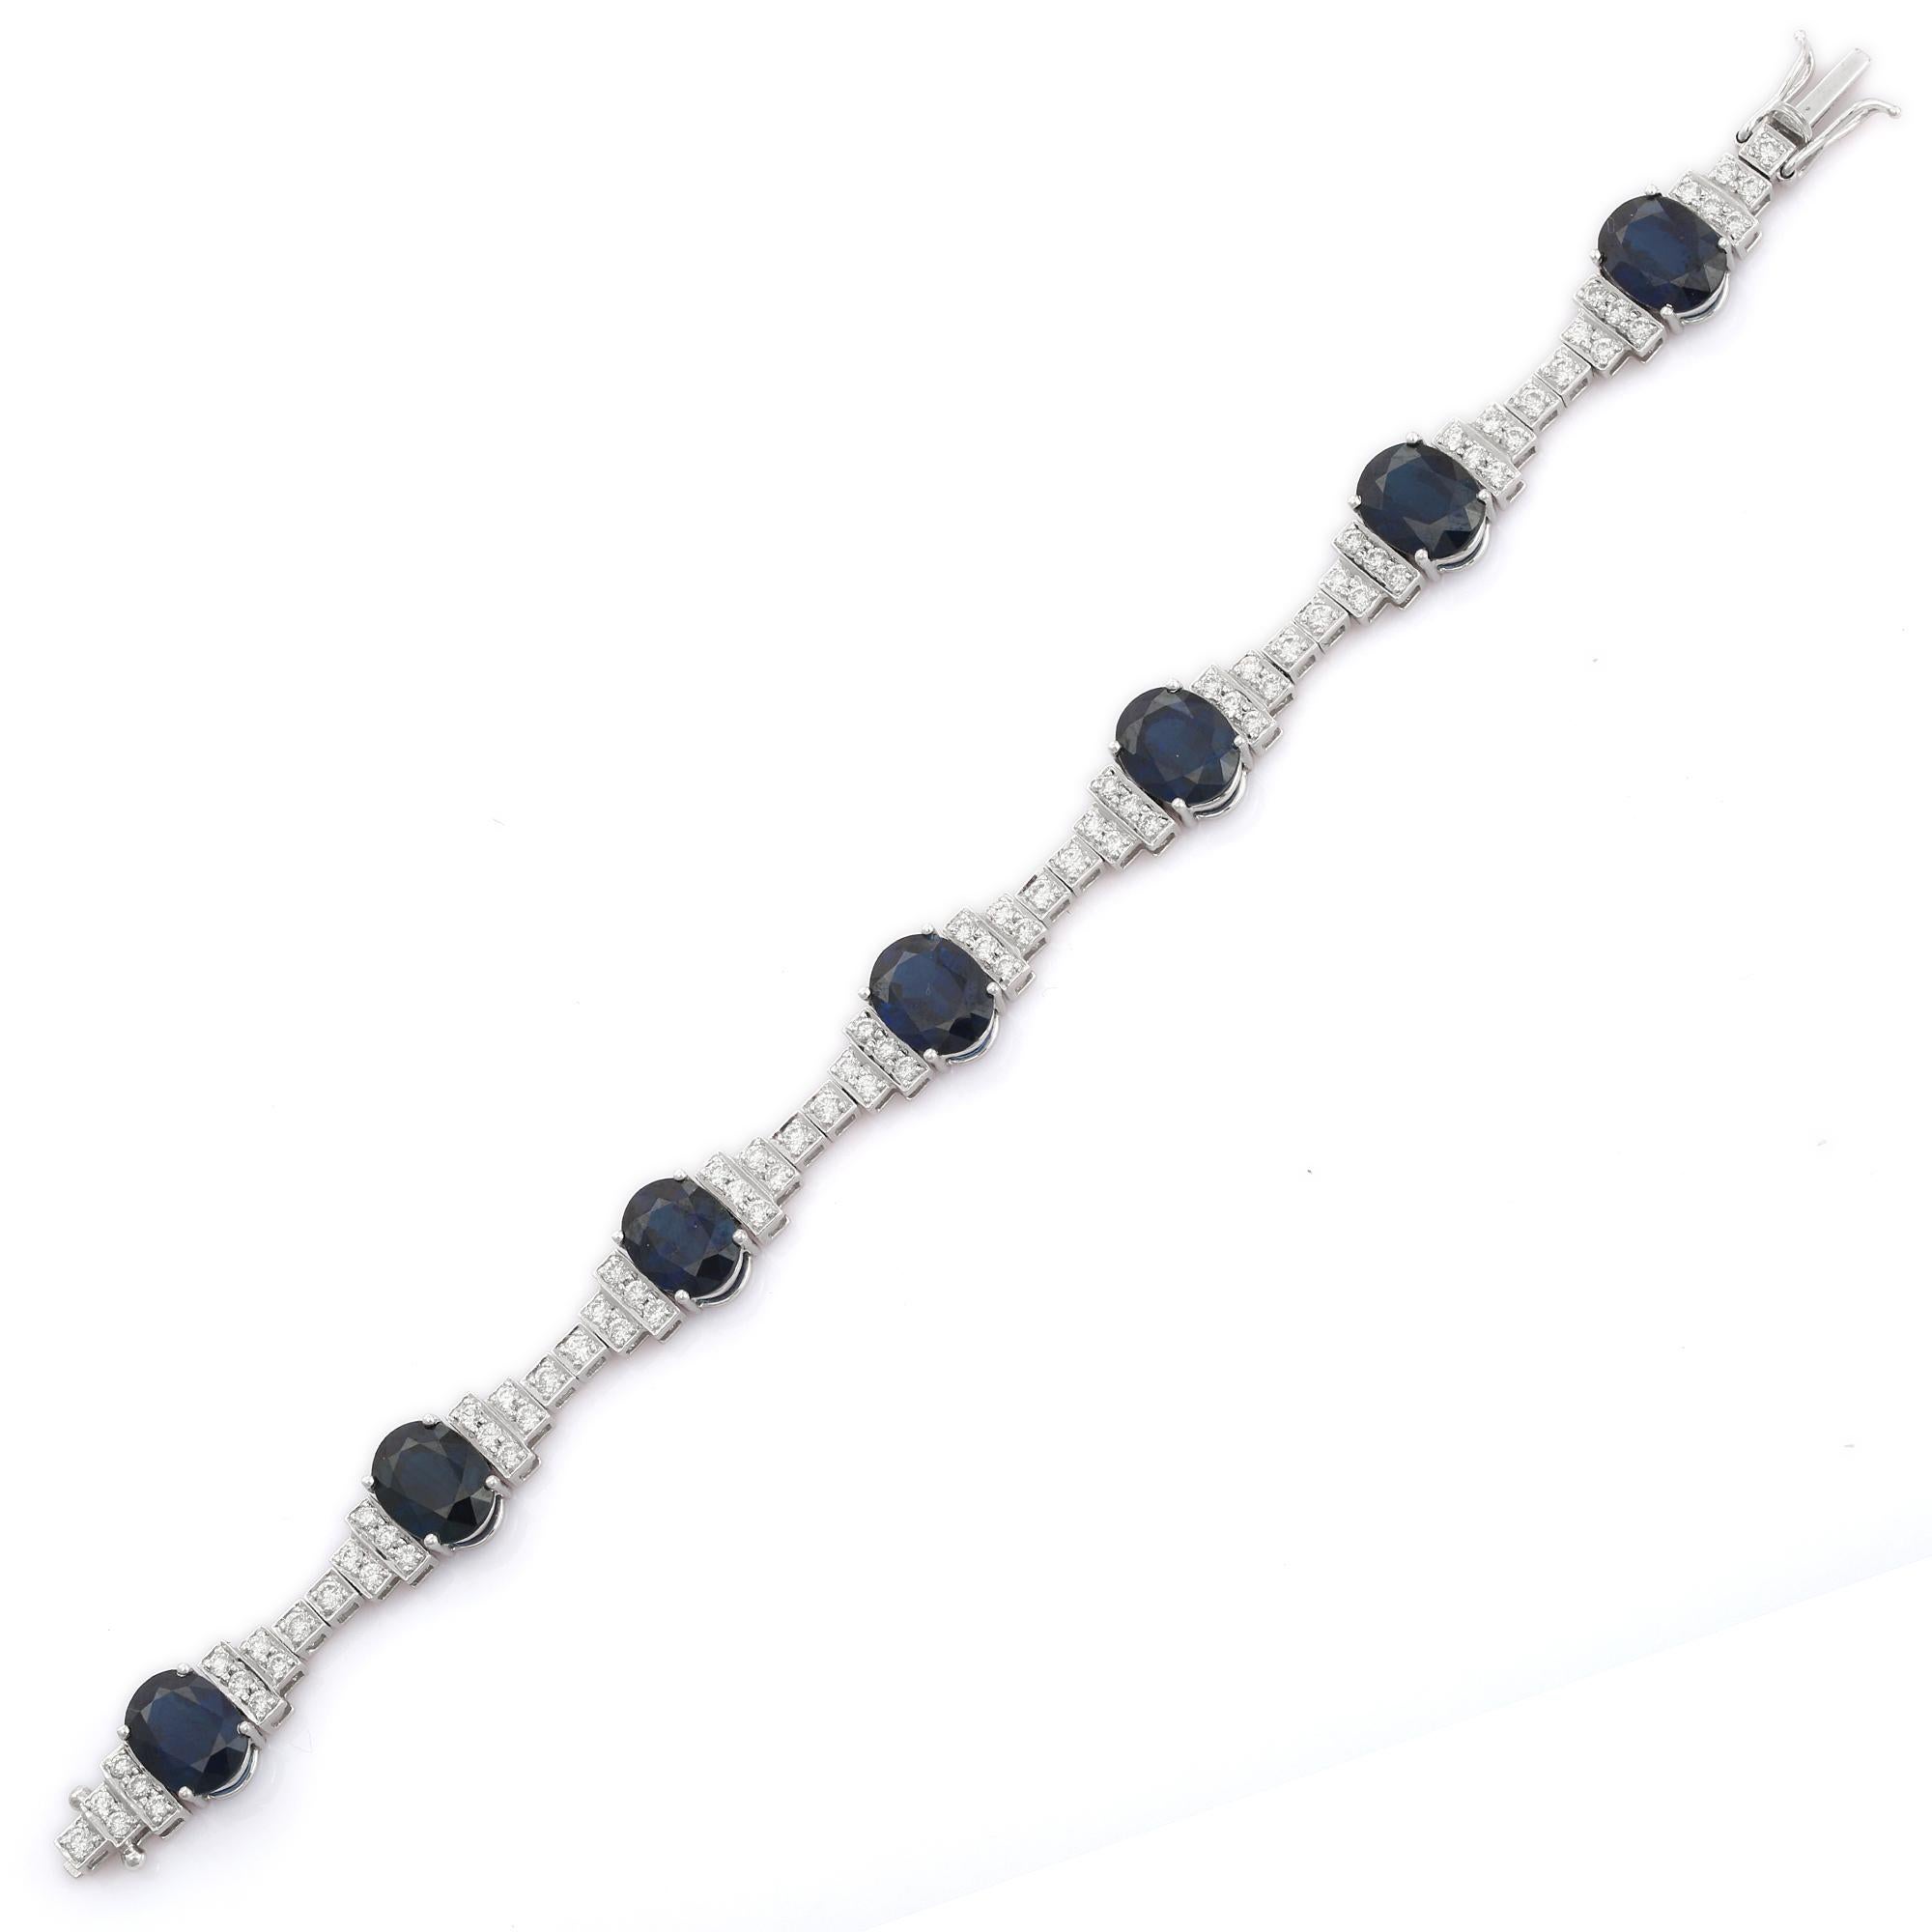 Oval Cut 24 Carat Blue Sapphire Wedding Tennis Bracelet in 18K White Gold with Diamonds For Sale